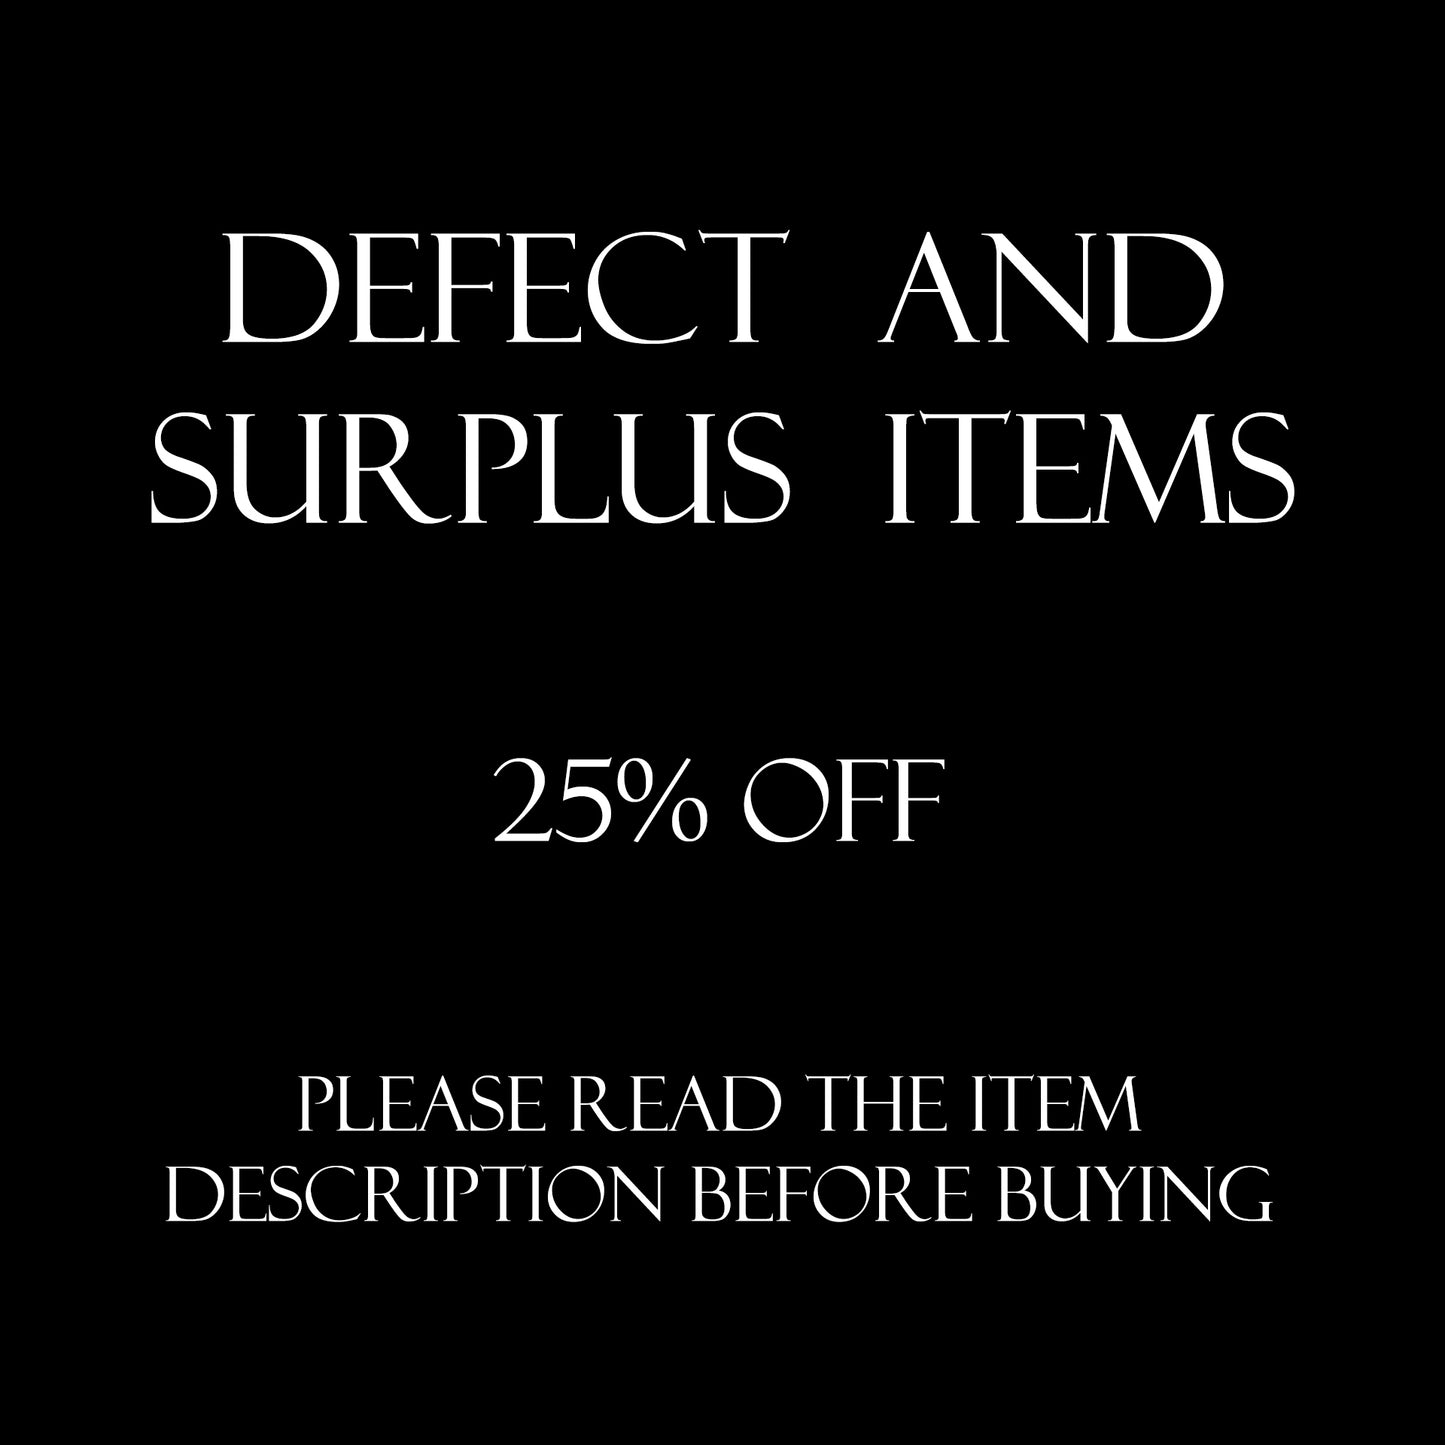 Defect and Surplus items